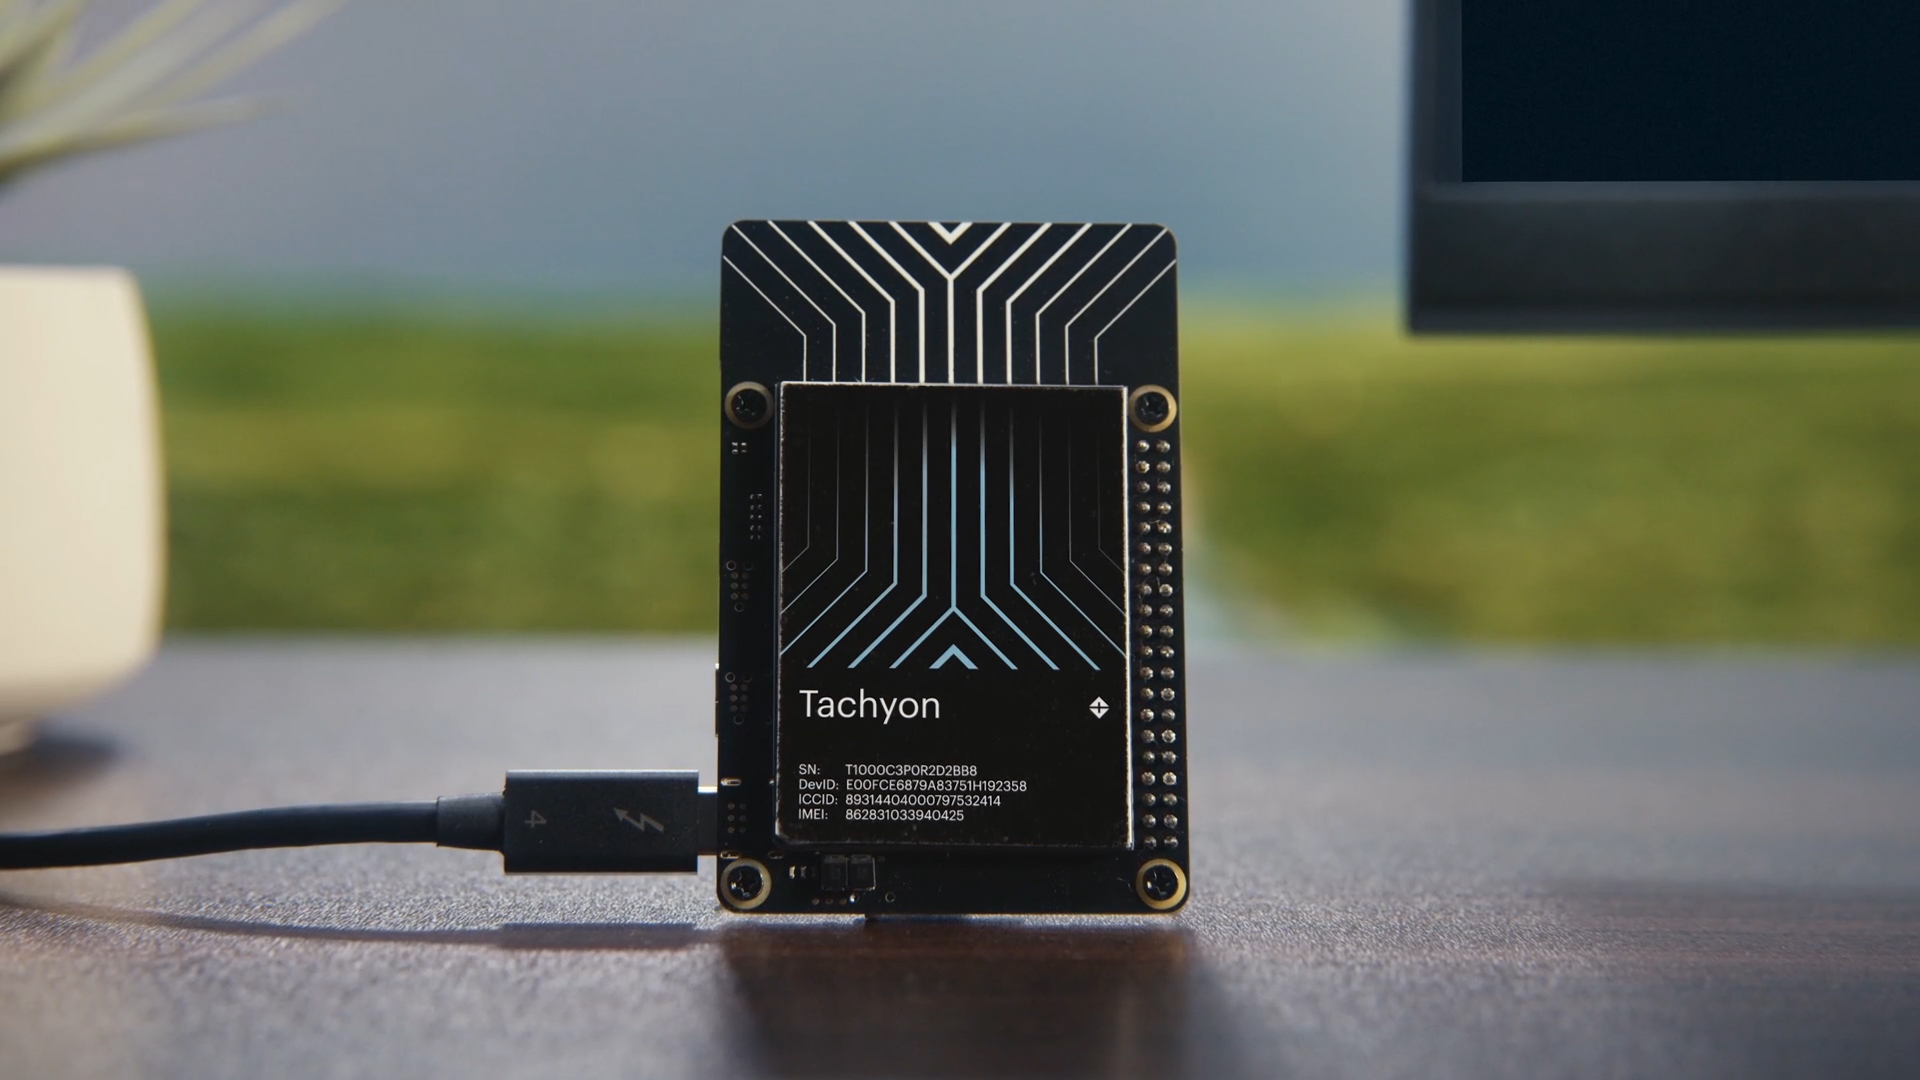 A commercial introducing Particle's new Tachyon single-board computer (SBC), the first 5G, AI-enabled SBC on the market.